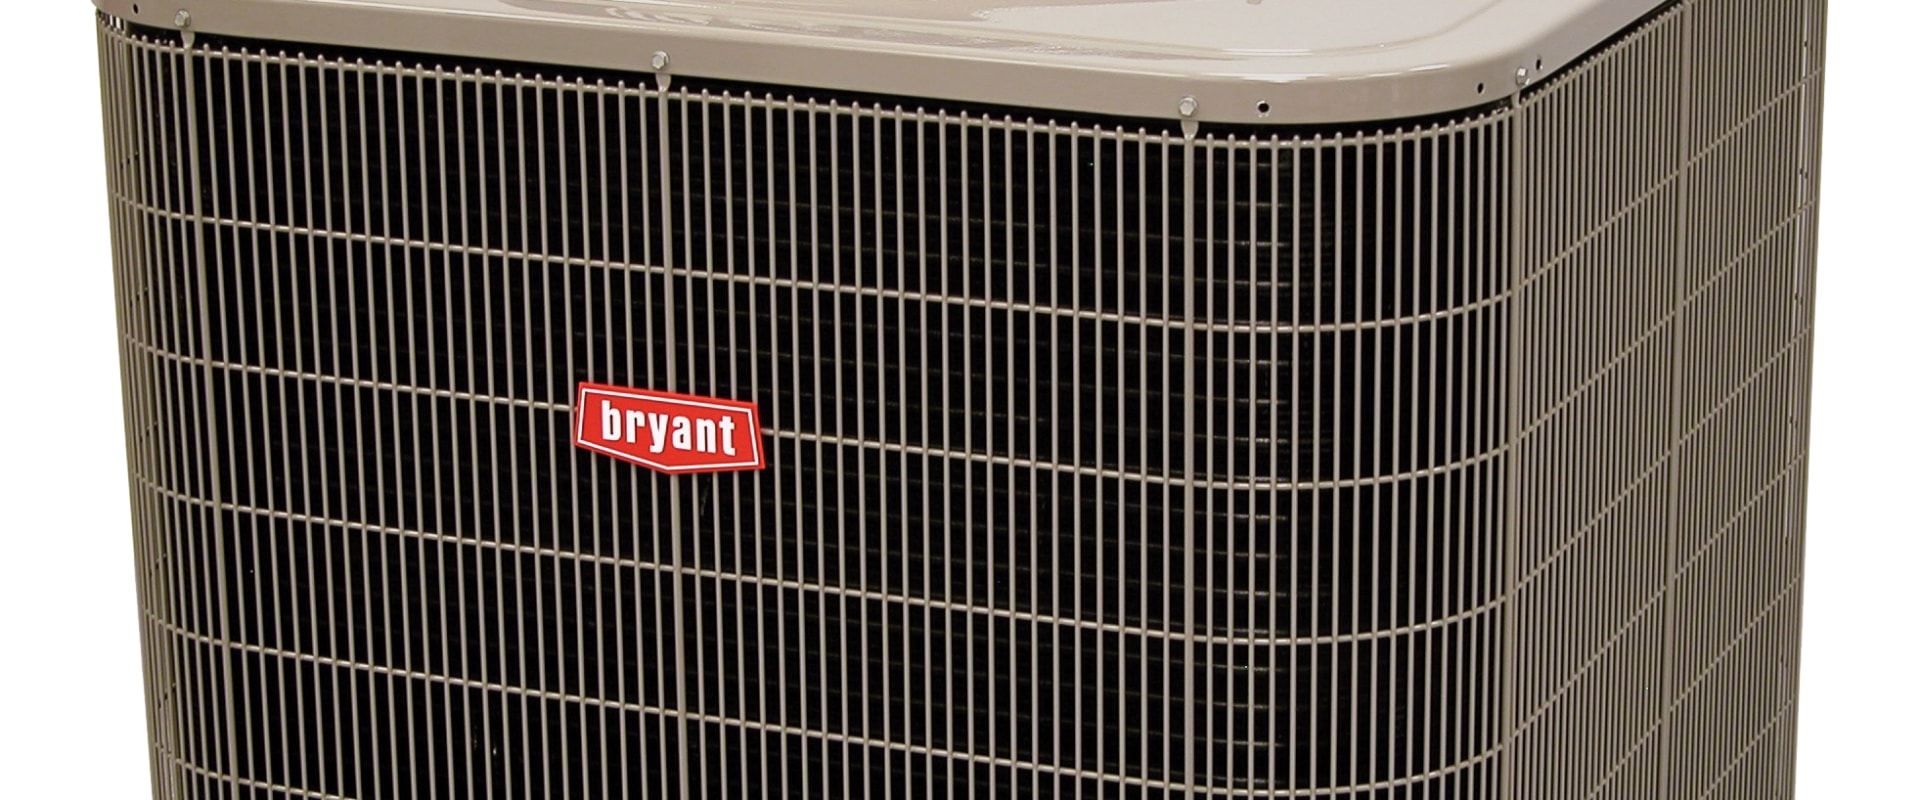 Decoding Bryant HVAC Furnace Filter Sizes With A Comprehensive Guide